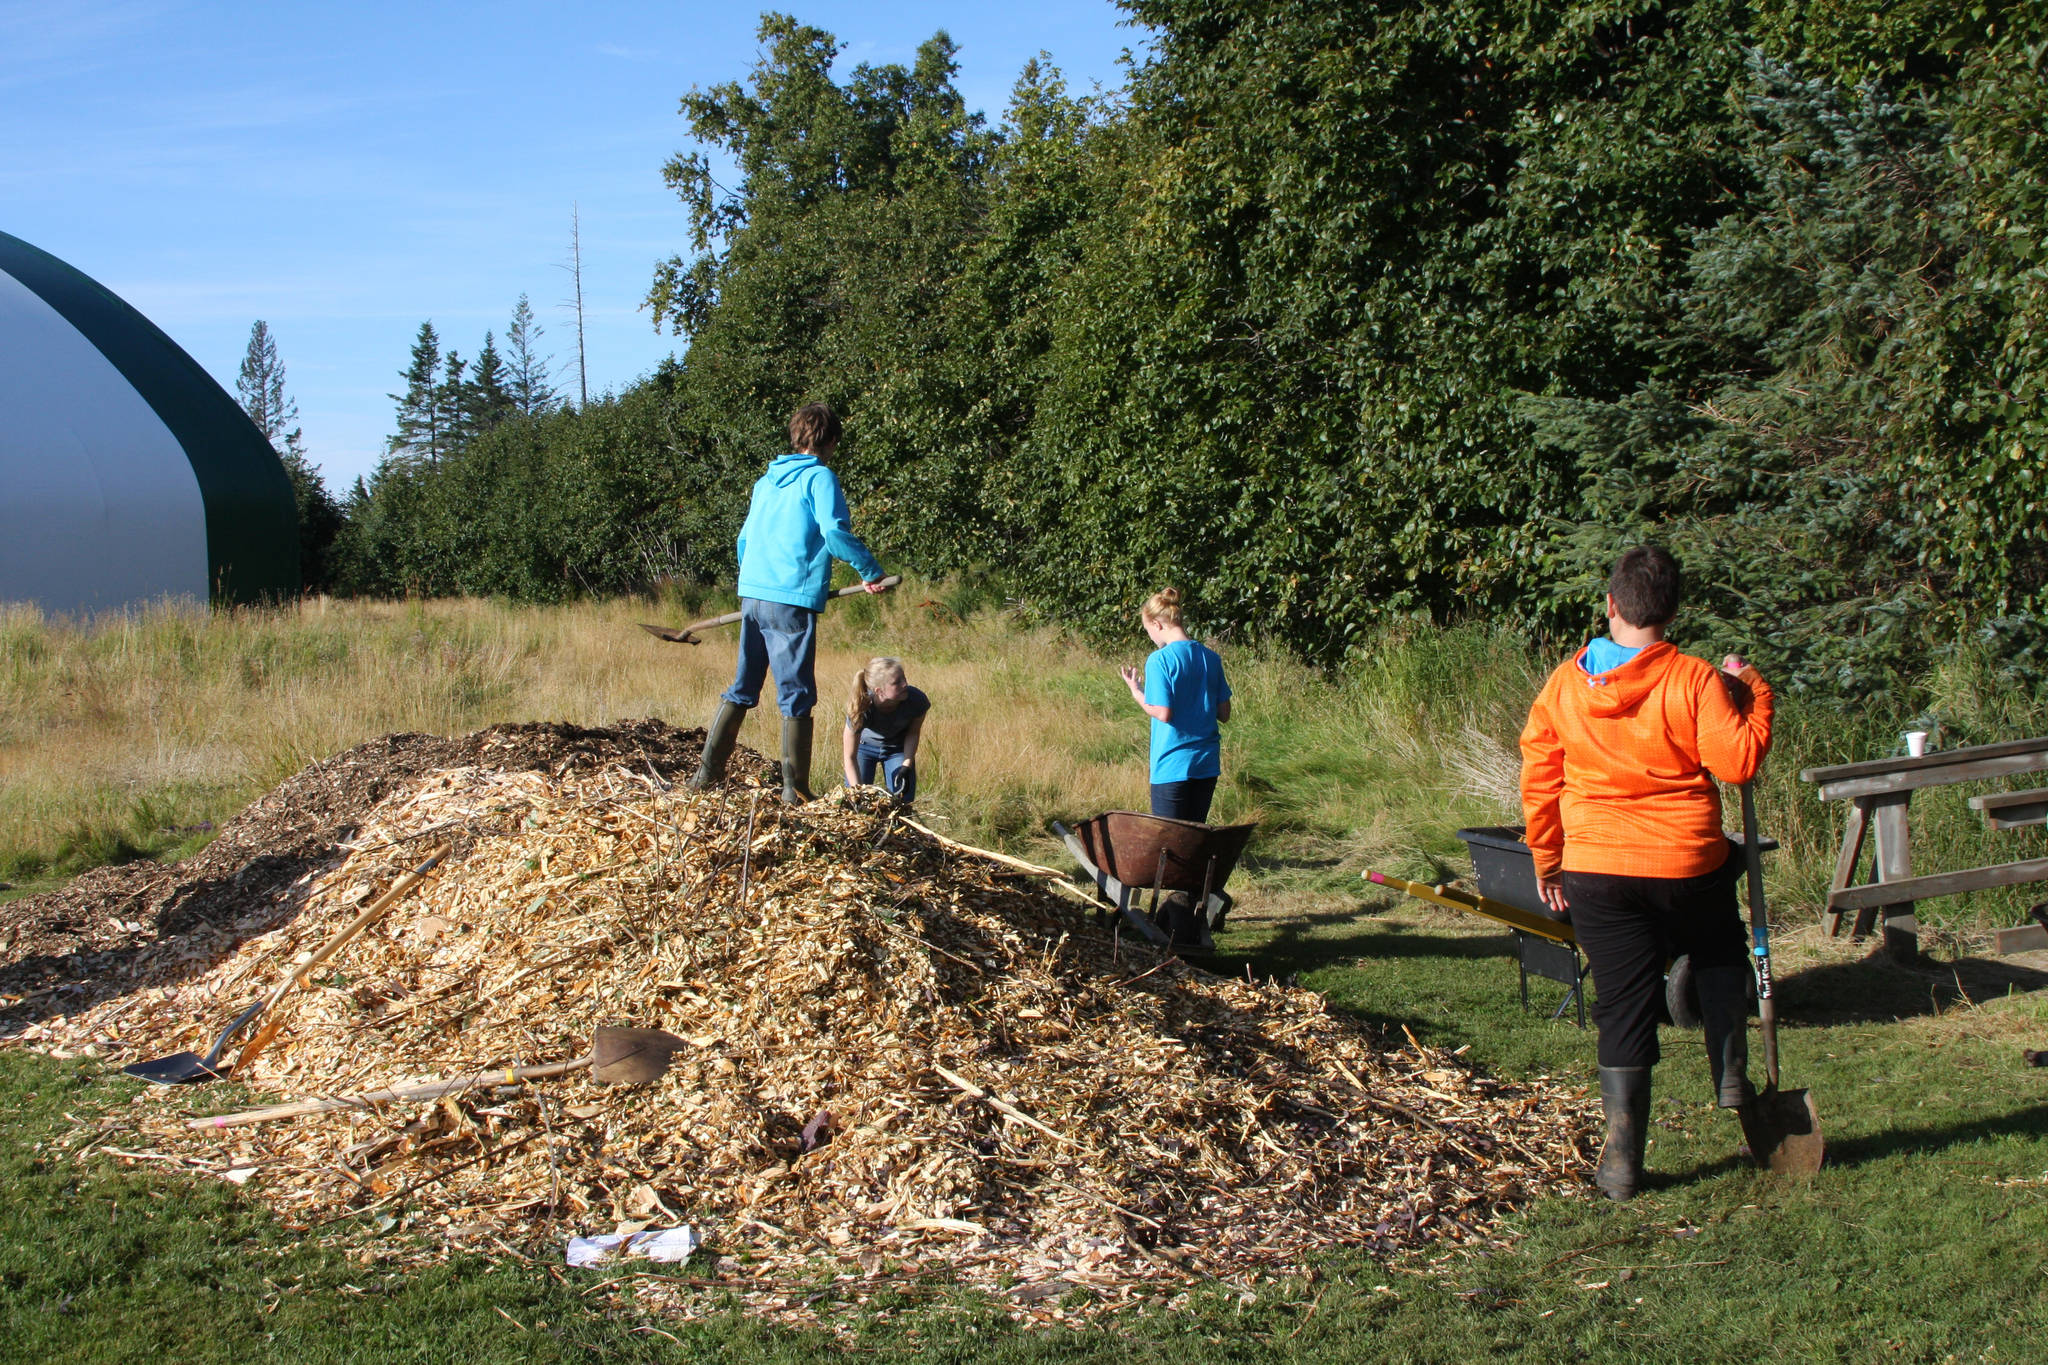 Homer Middle School eighth grade students load wheelbarrows with wood chips to be spread along the trail at Area 5 on the trail during the restoration event on Wednesday, Sept. 12, 2018, in Homer, Alaska. (Photo by Delcenia Cosman)